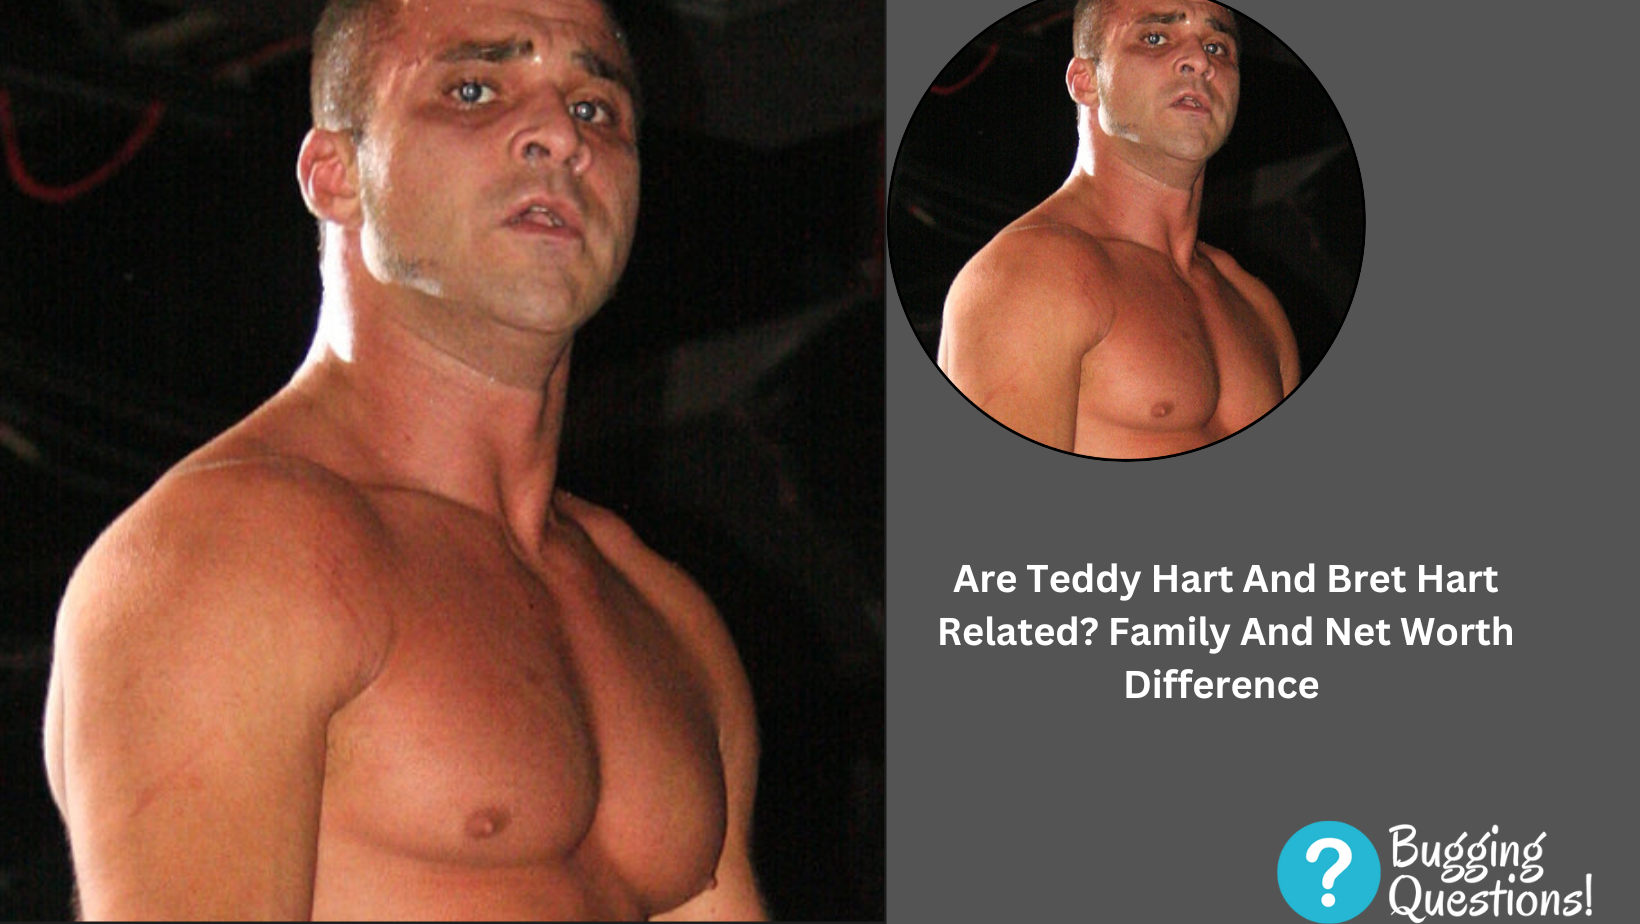 Are Teddy Hart And Bret Hart Related?